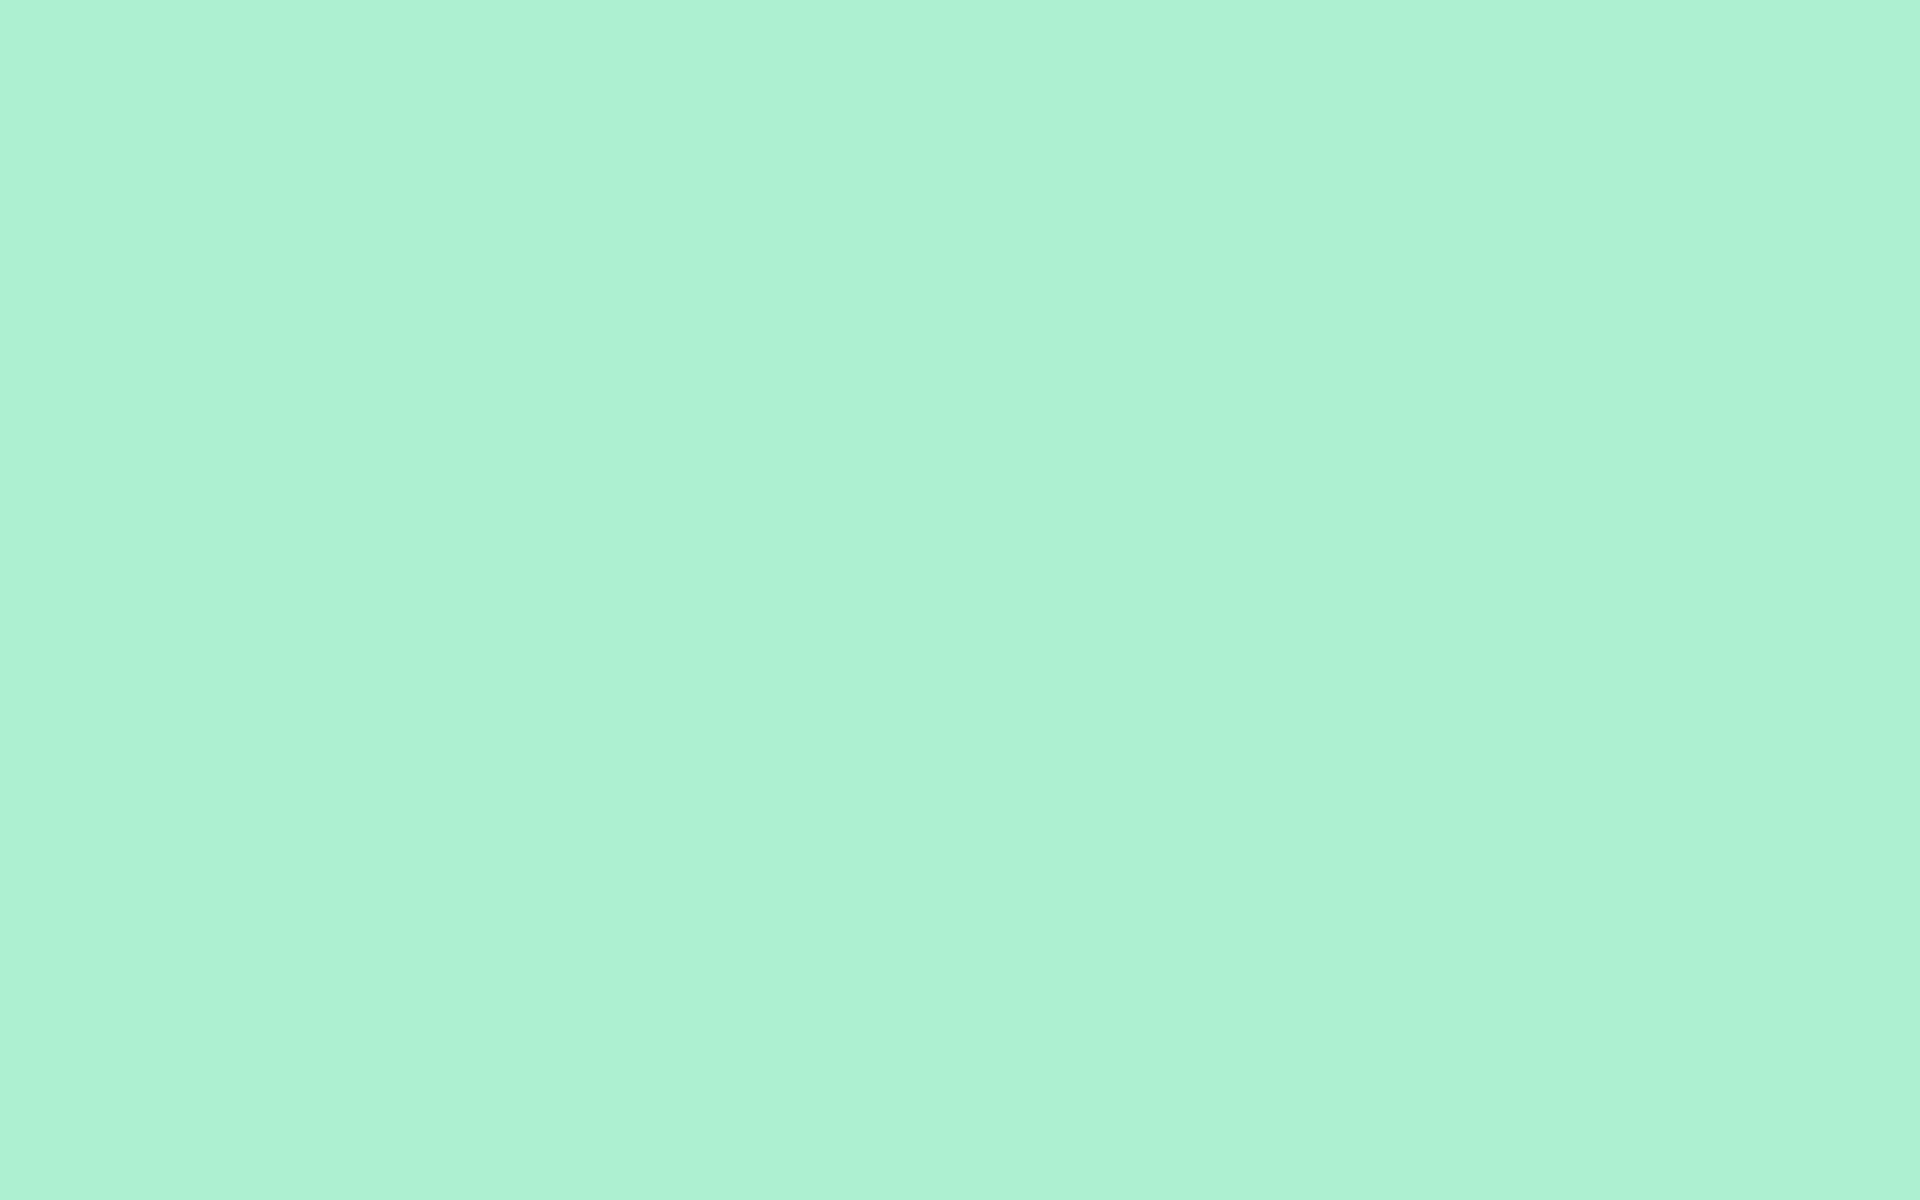 10 Selected Wallpaper Aesthetic Light Green You Can Use It For Free